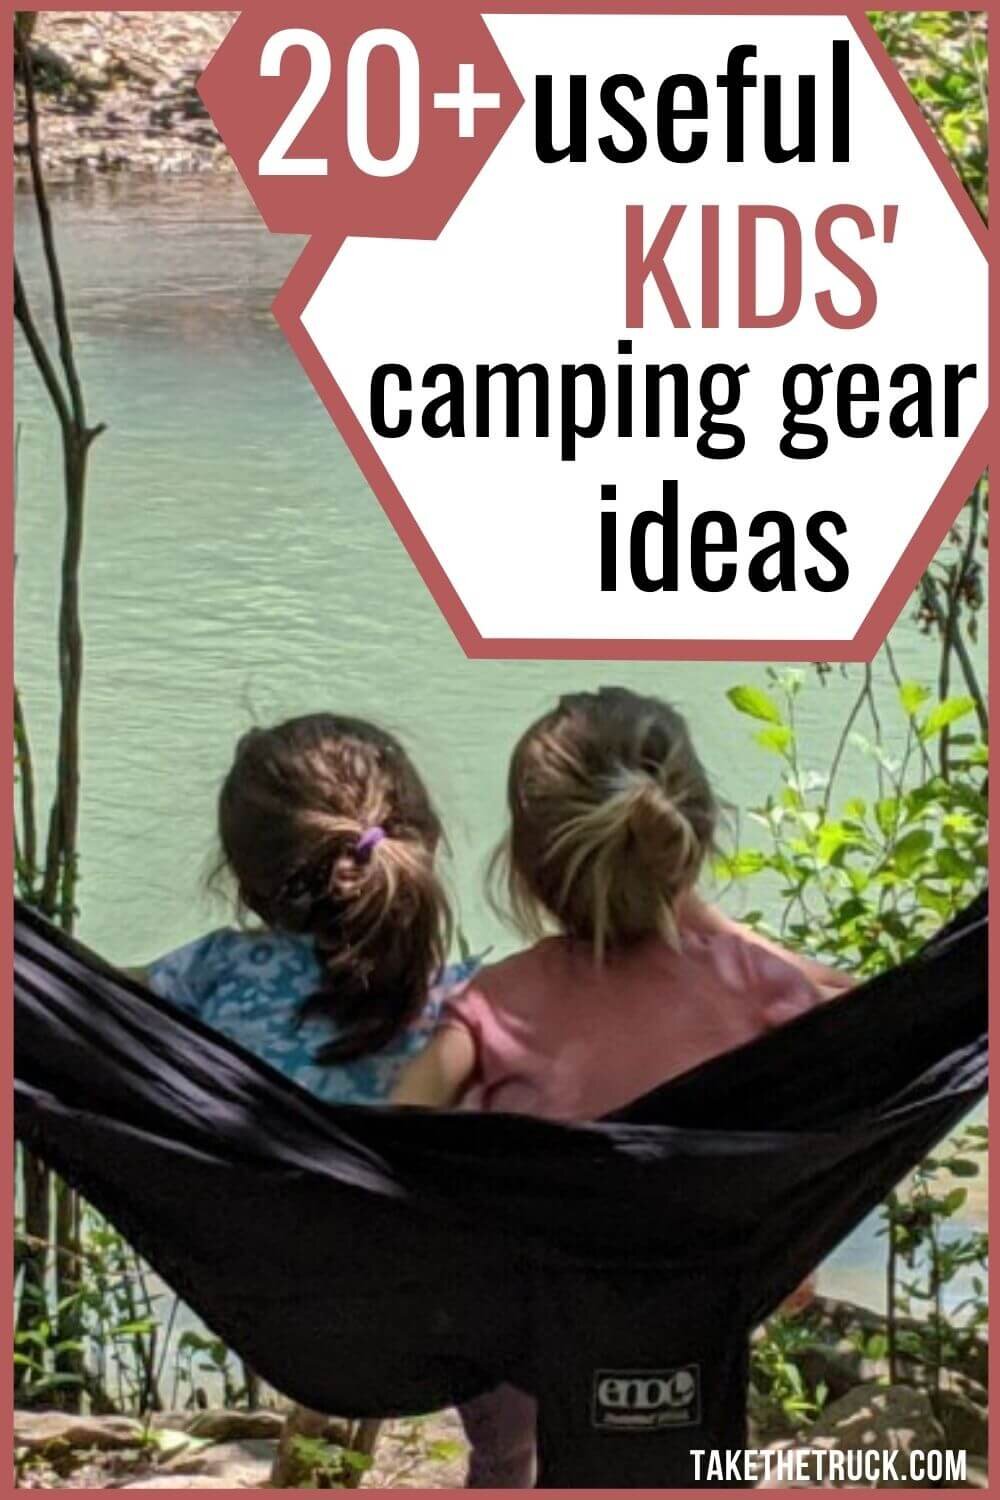 Looking for the best kids’ camping gear to buy for the children in your life? Here's over 20 useful camping gear ideas that make great outdoor gear gifts for kids, from babies on up to teens.